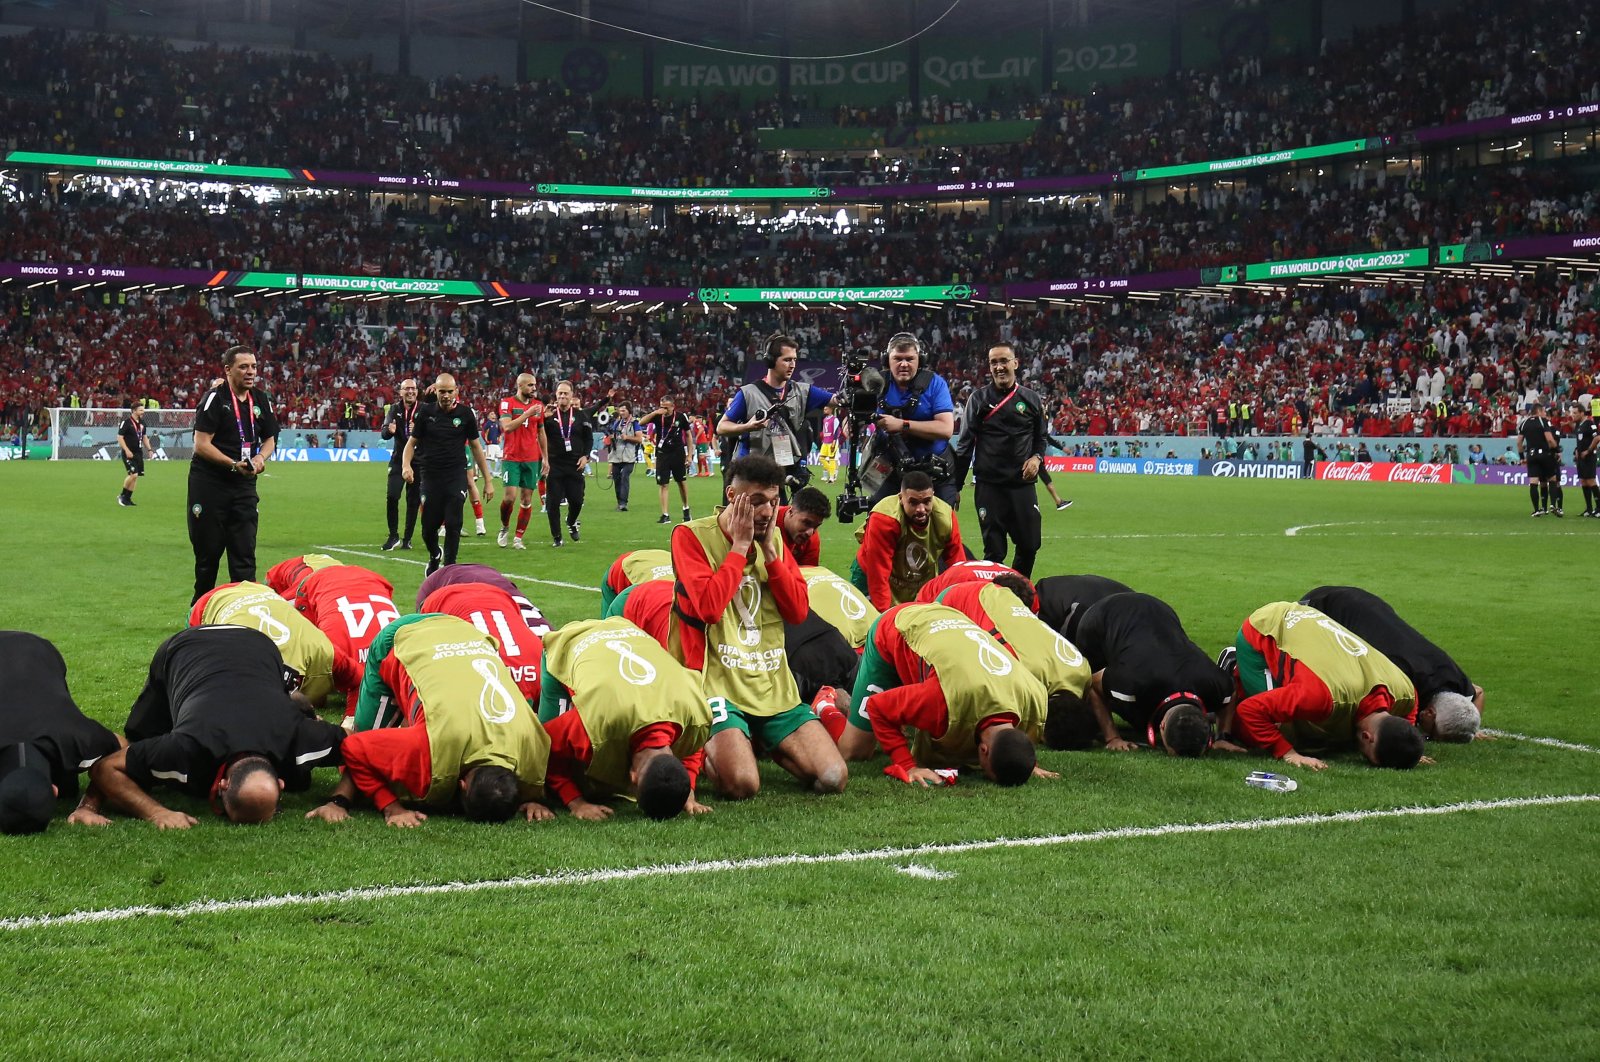 Morocco players and backroom staff kneel on the ground in prayer after their victory over Spain, Al Rayyan, Qatar, Dec. 6, 2022. (Getty Images Photo)